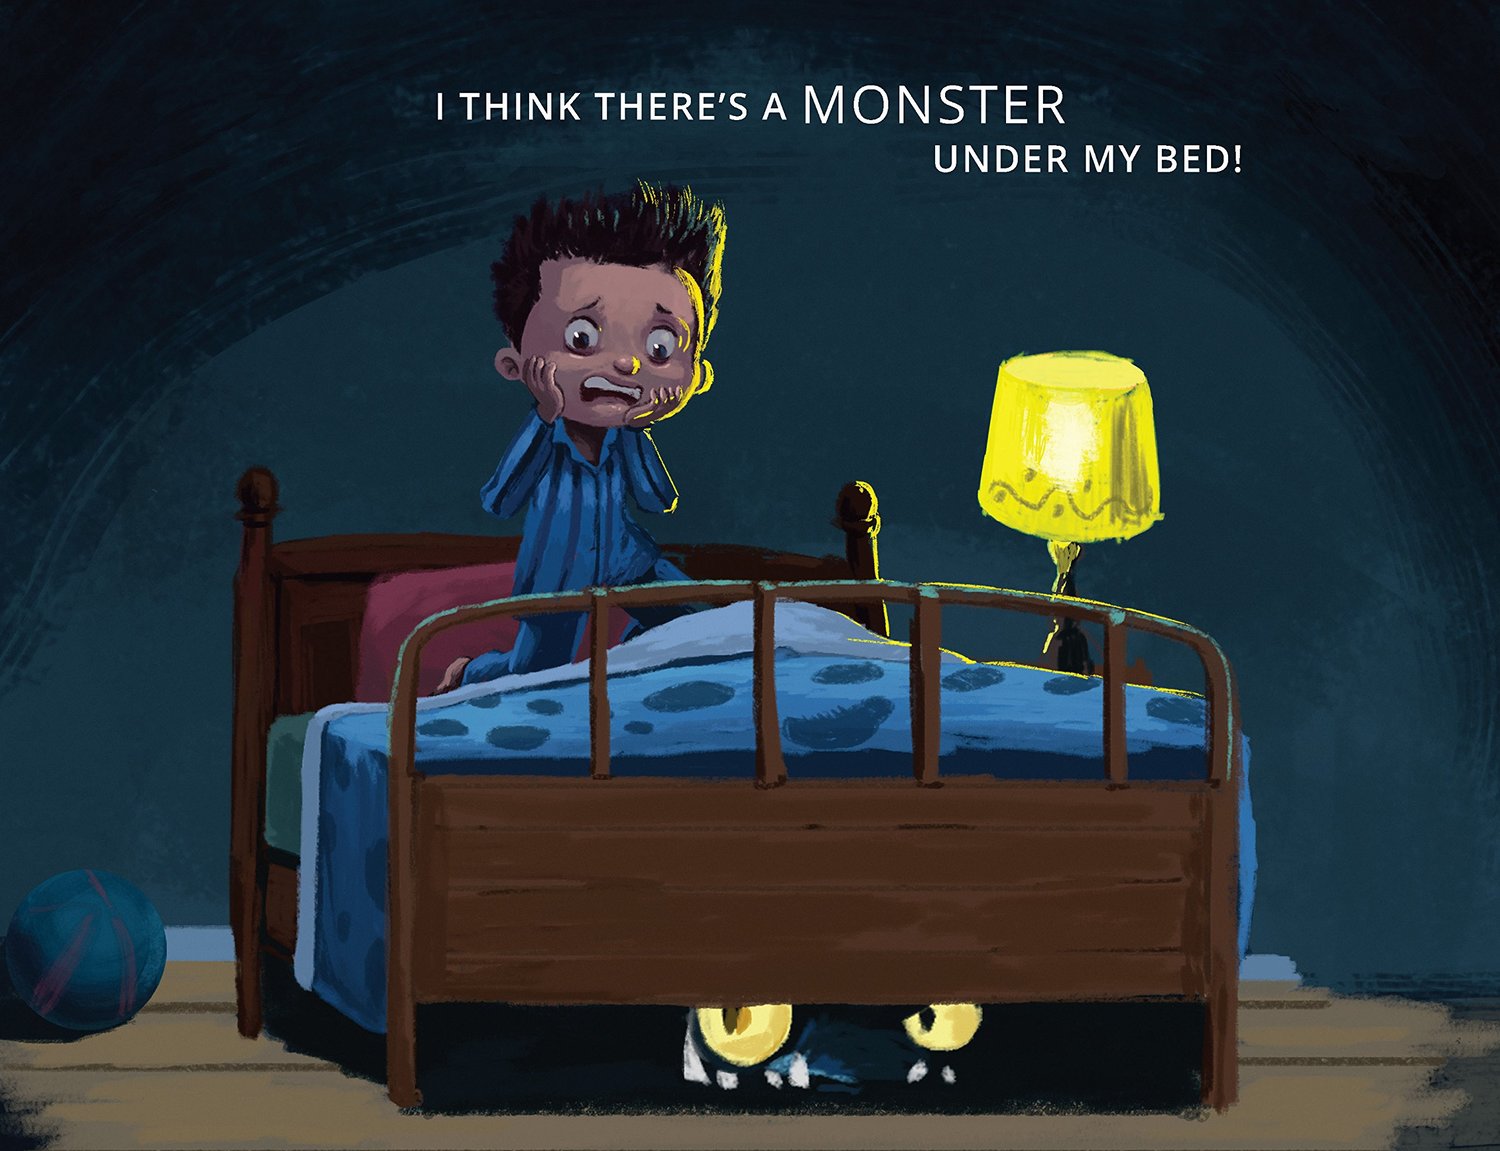 Monster under the bed дорама